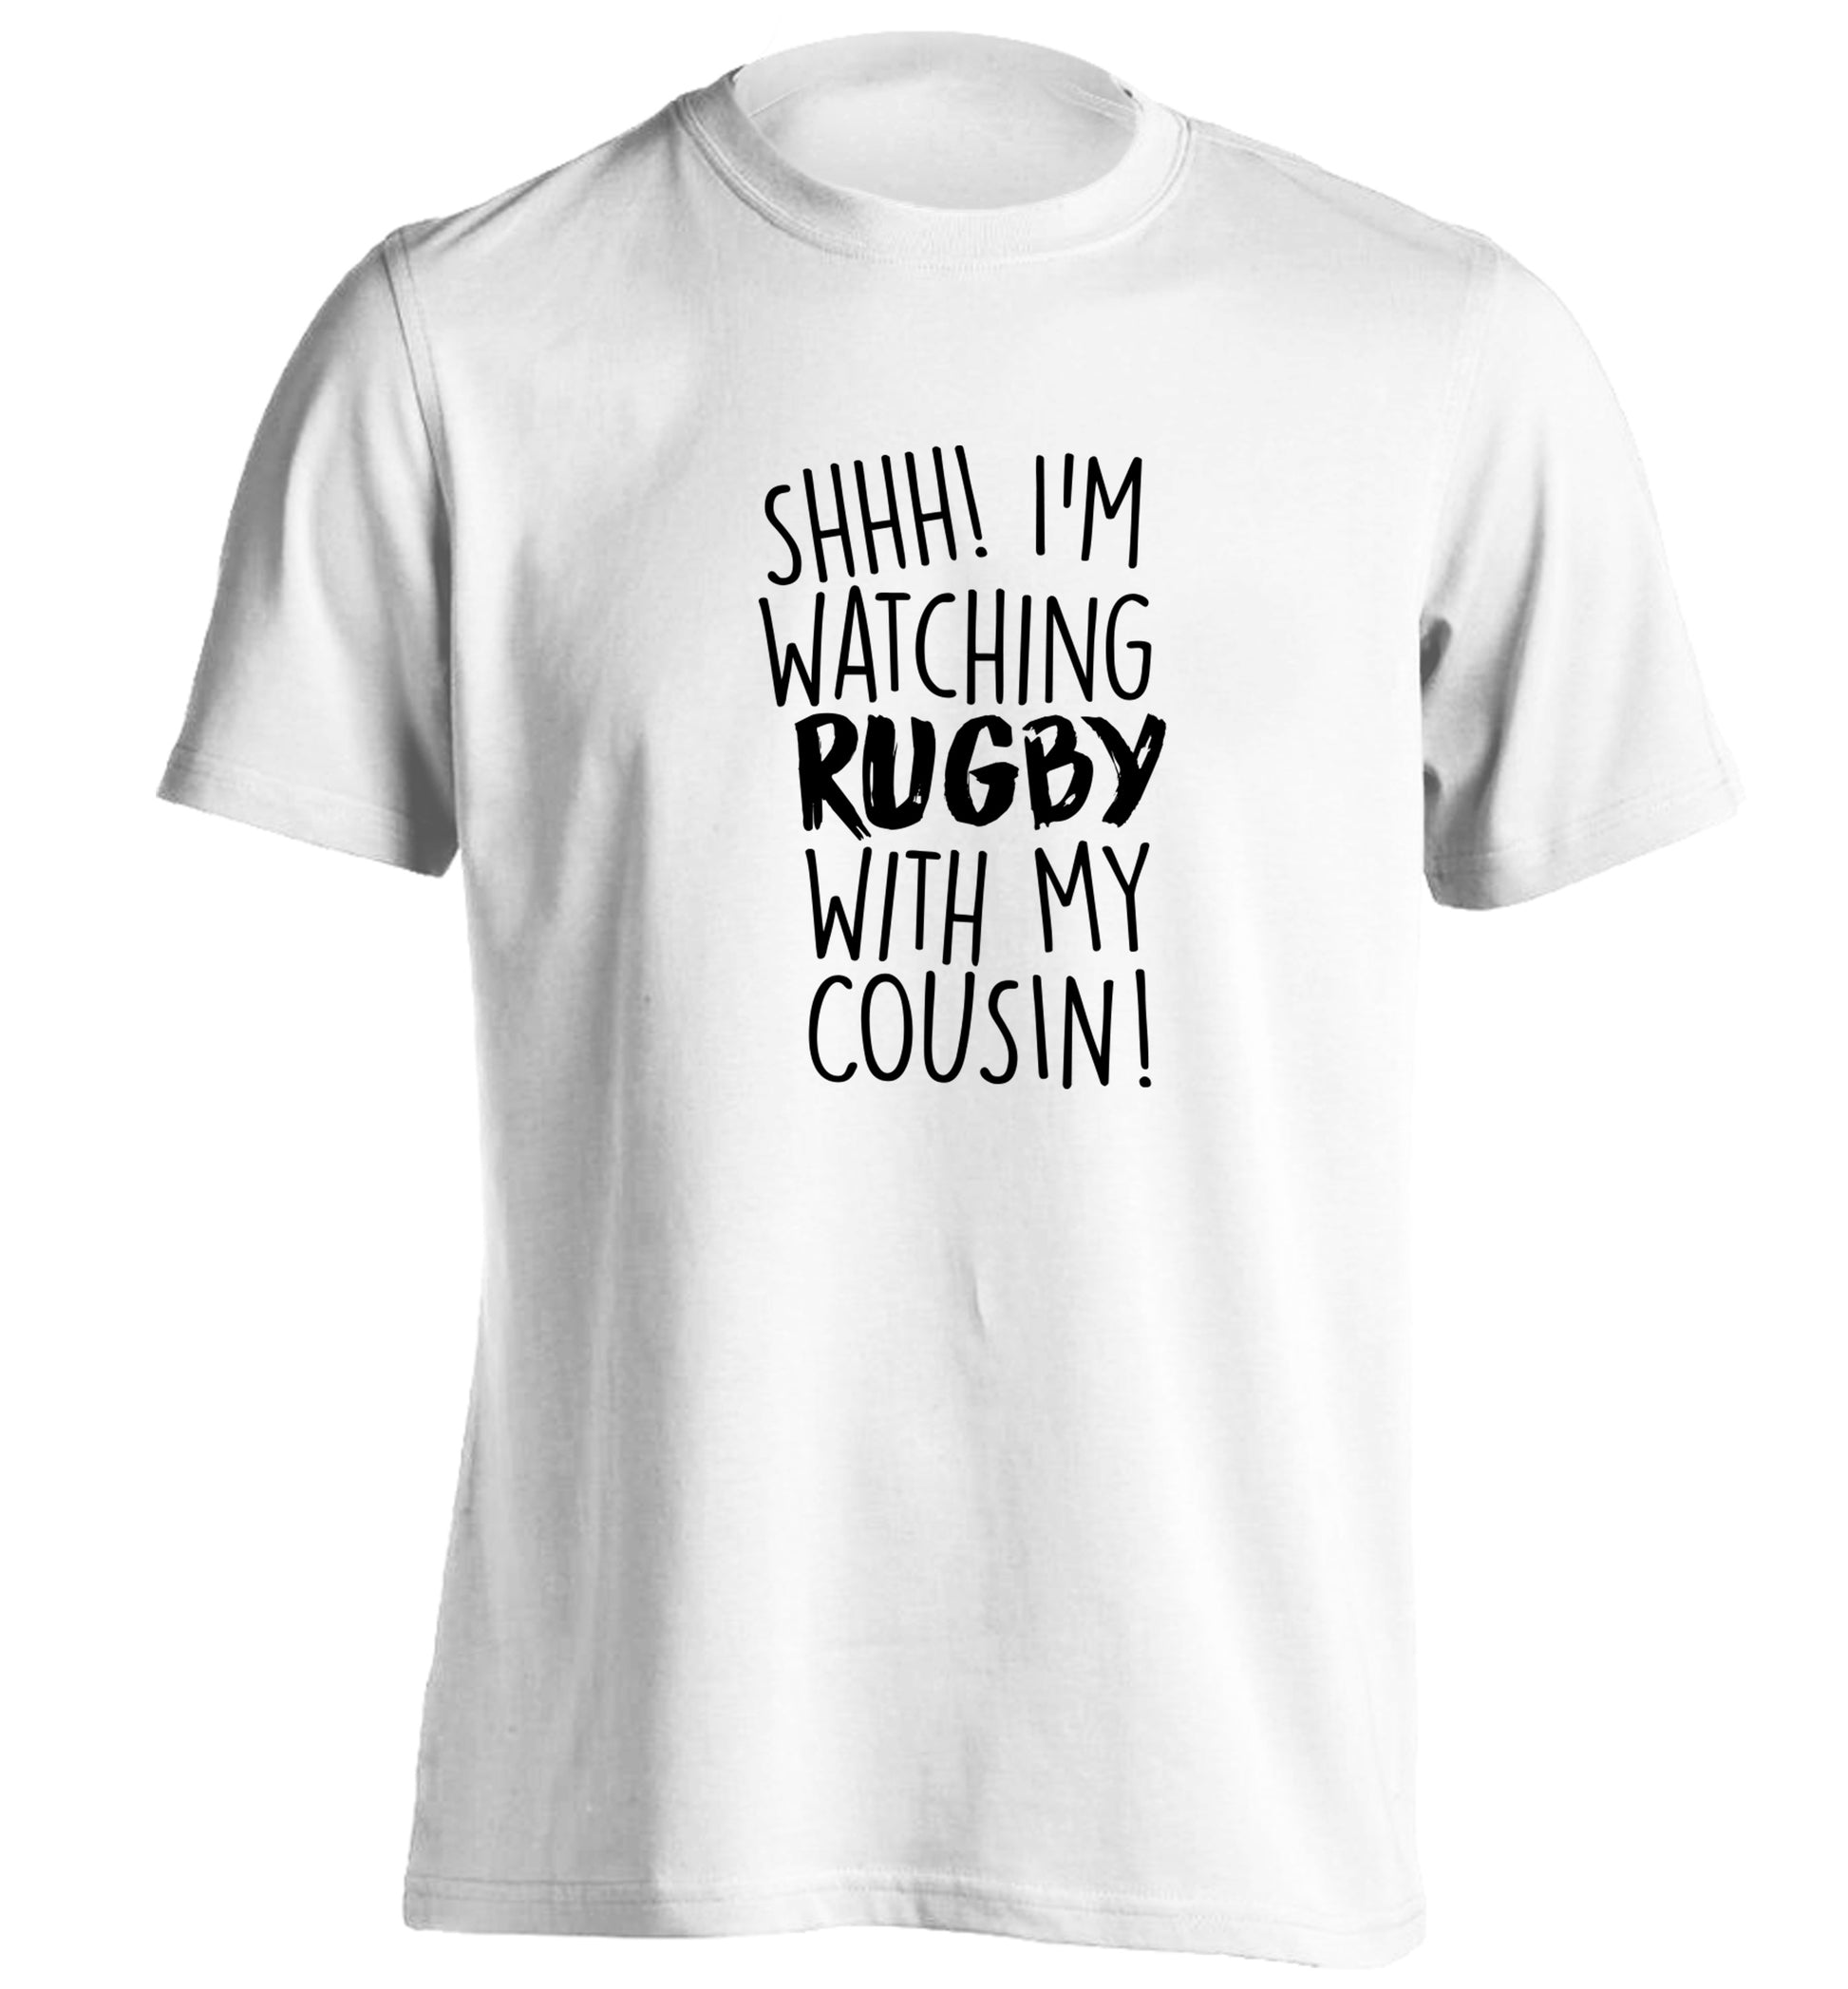 Shhh I'm watching rugby with my cousin adults unisex white Tshirt 2XL